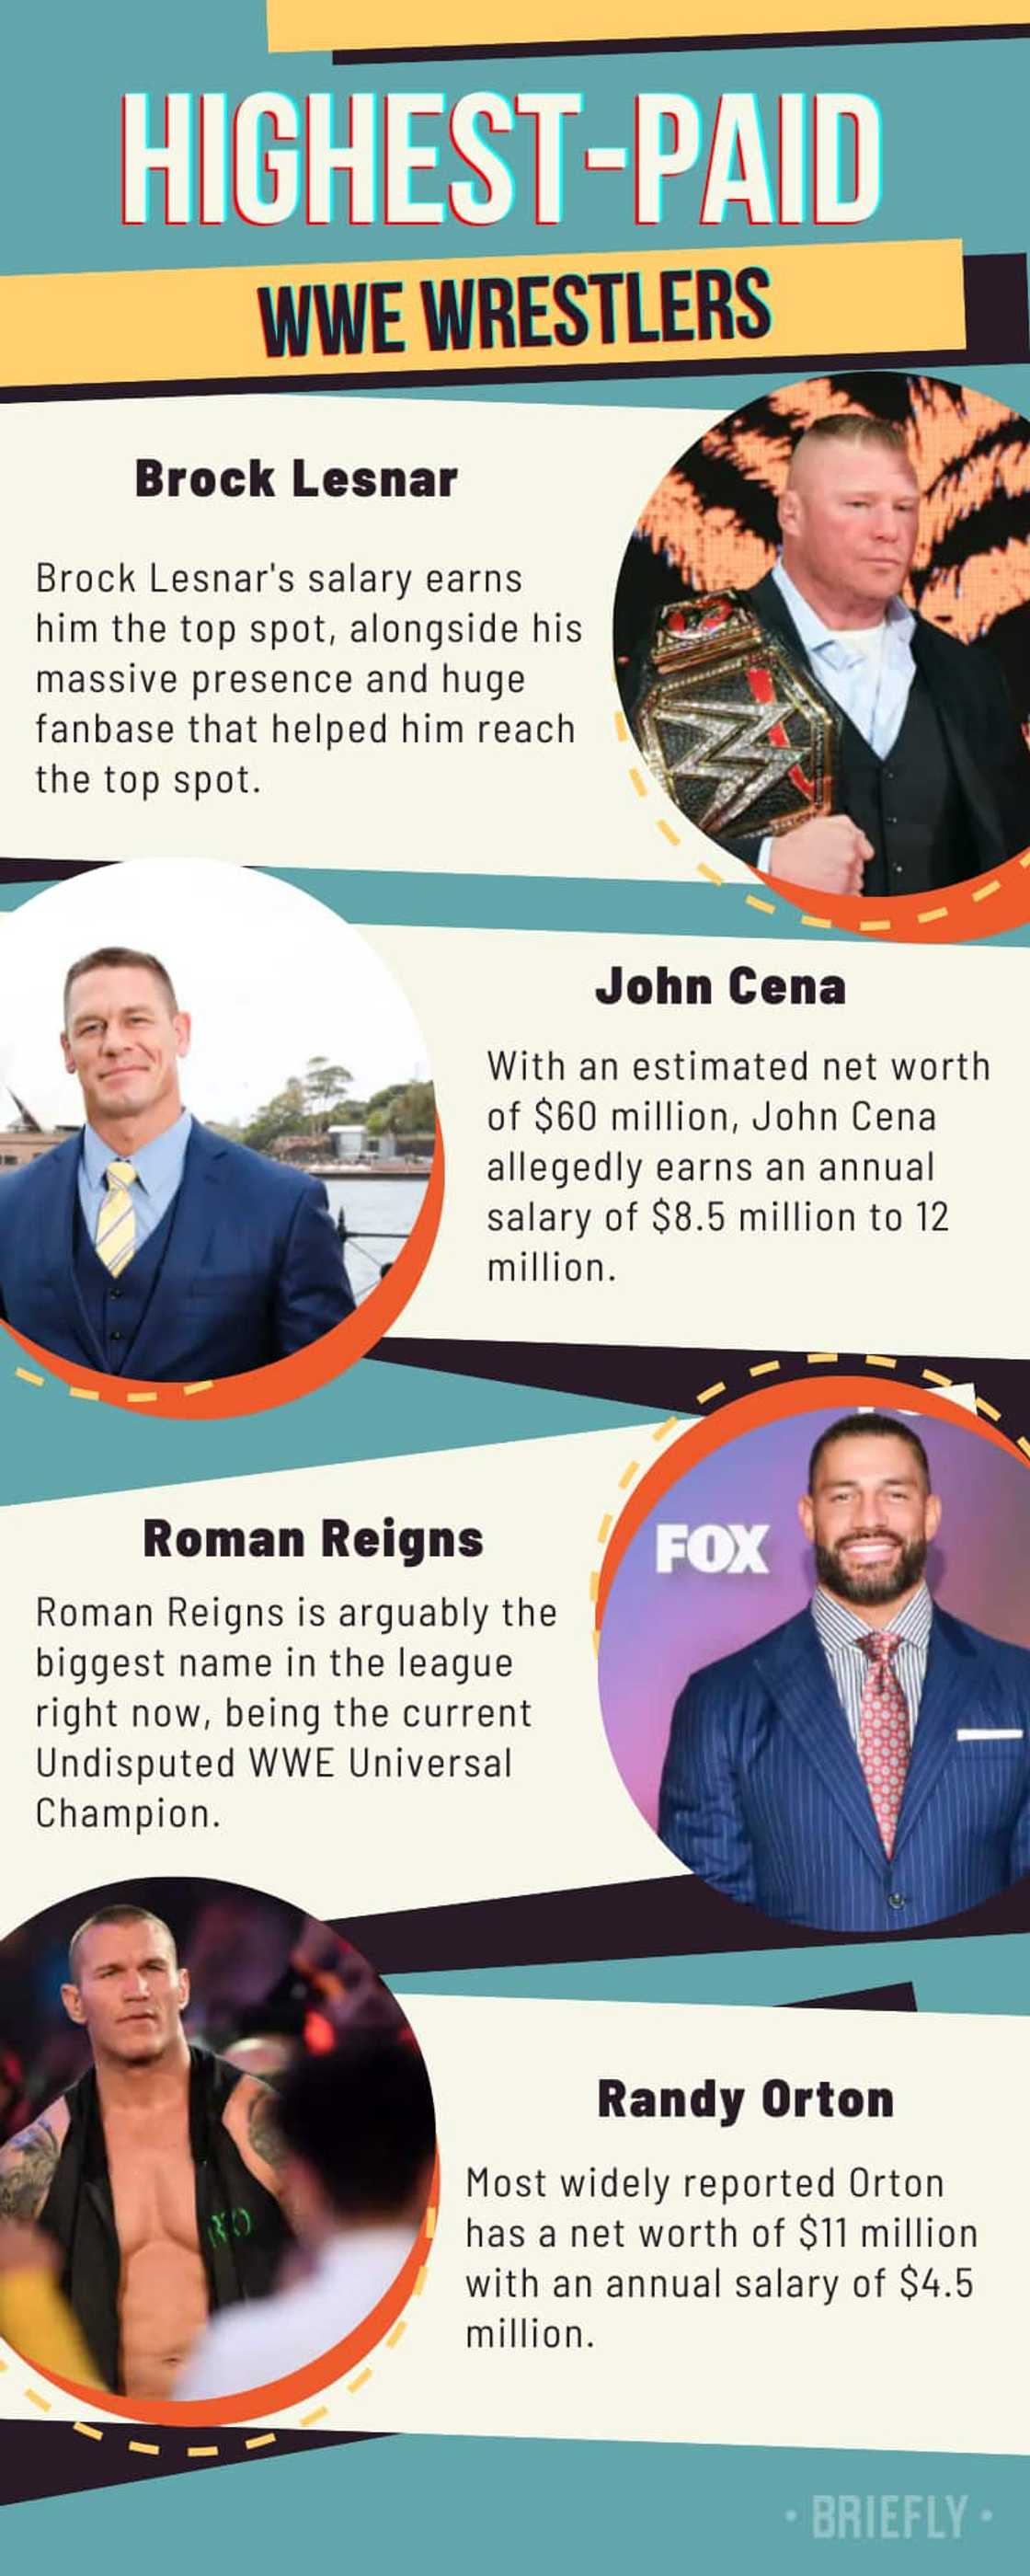 Highest-paid WWE wrestlers and their net worths